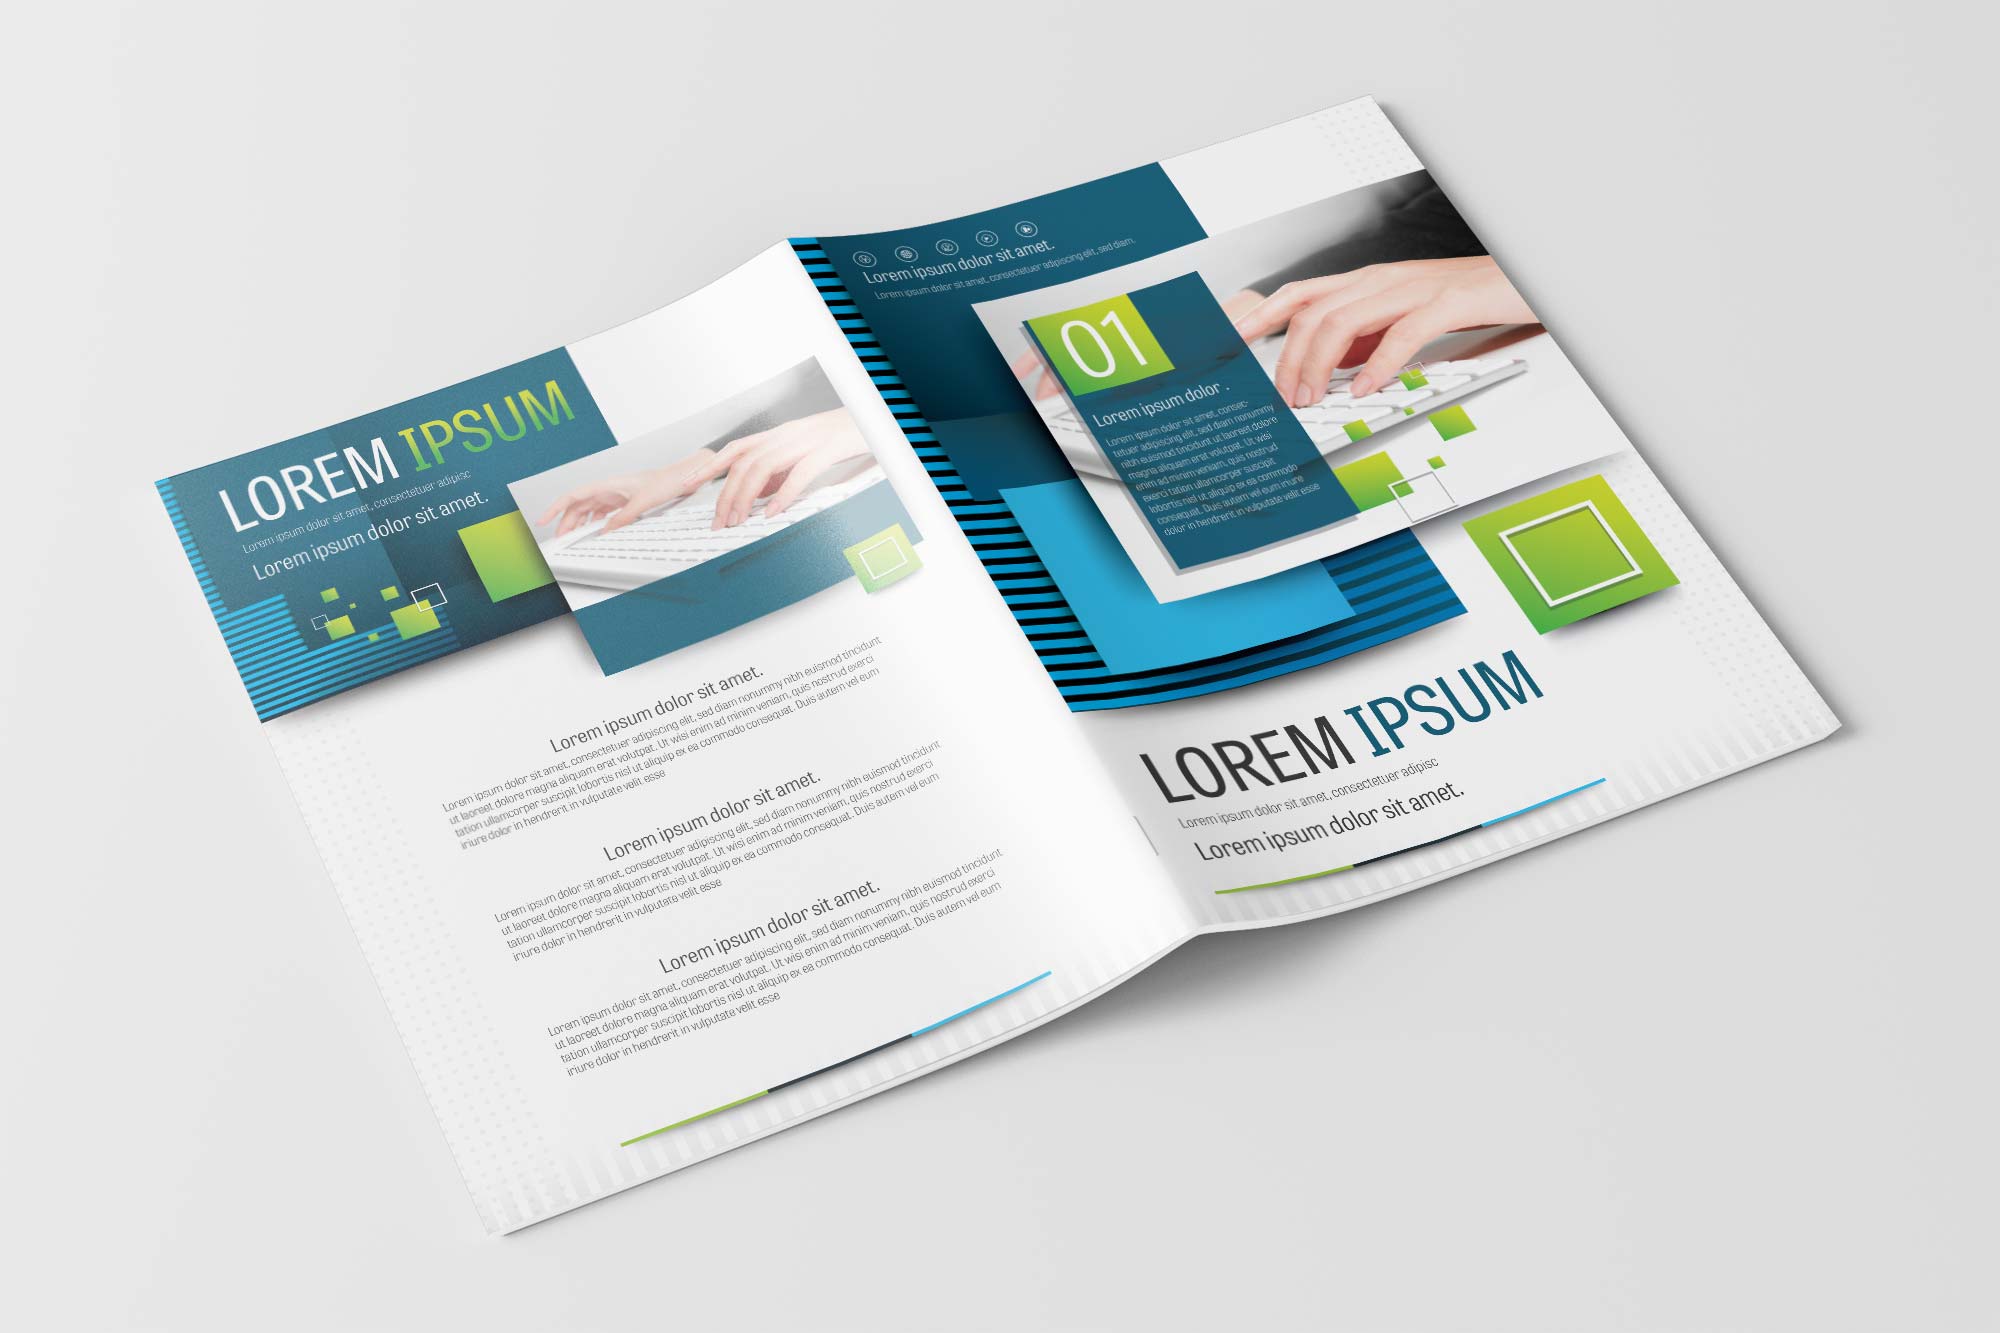 Free Business Brochure Design Template with Blue and Green